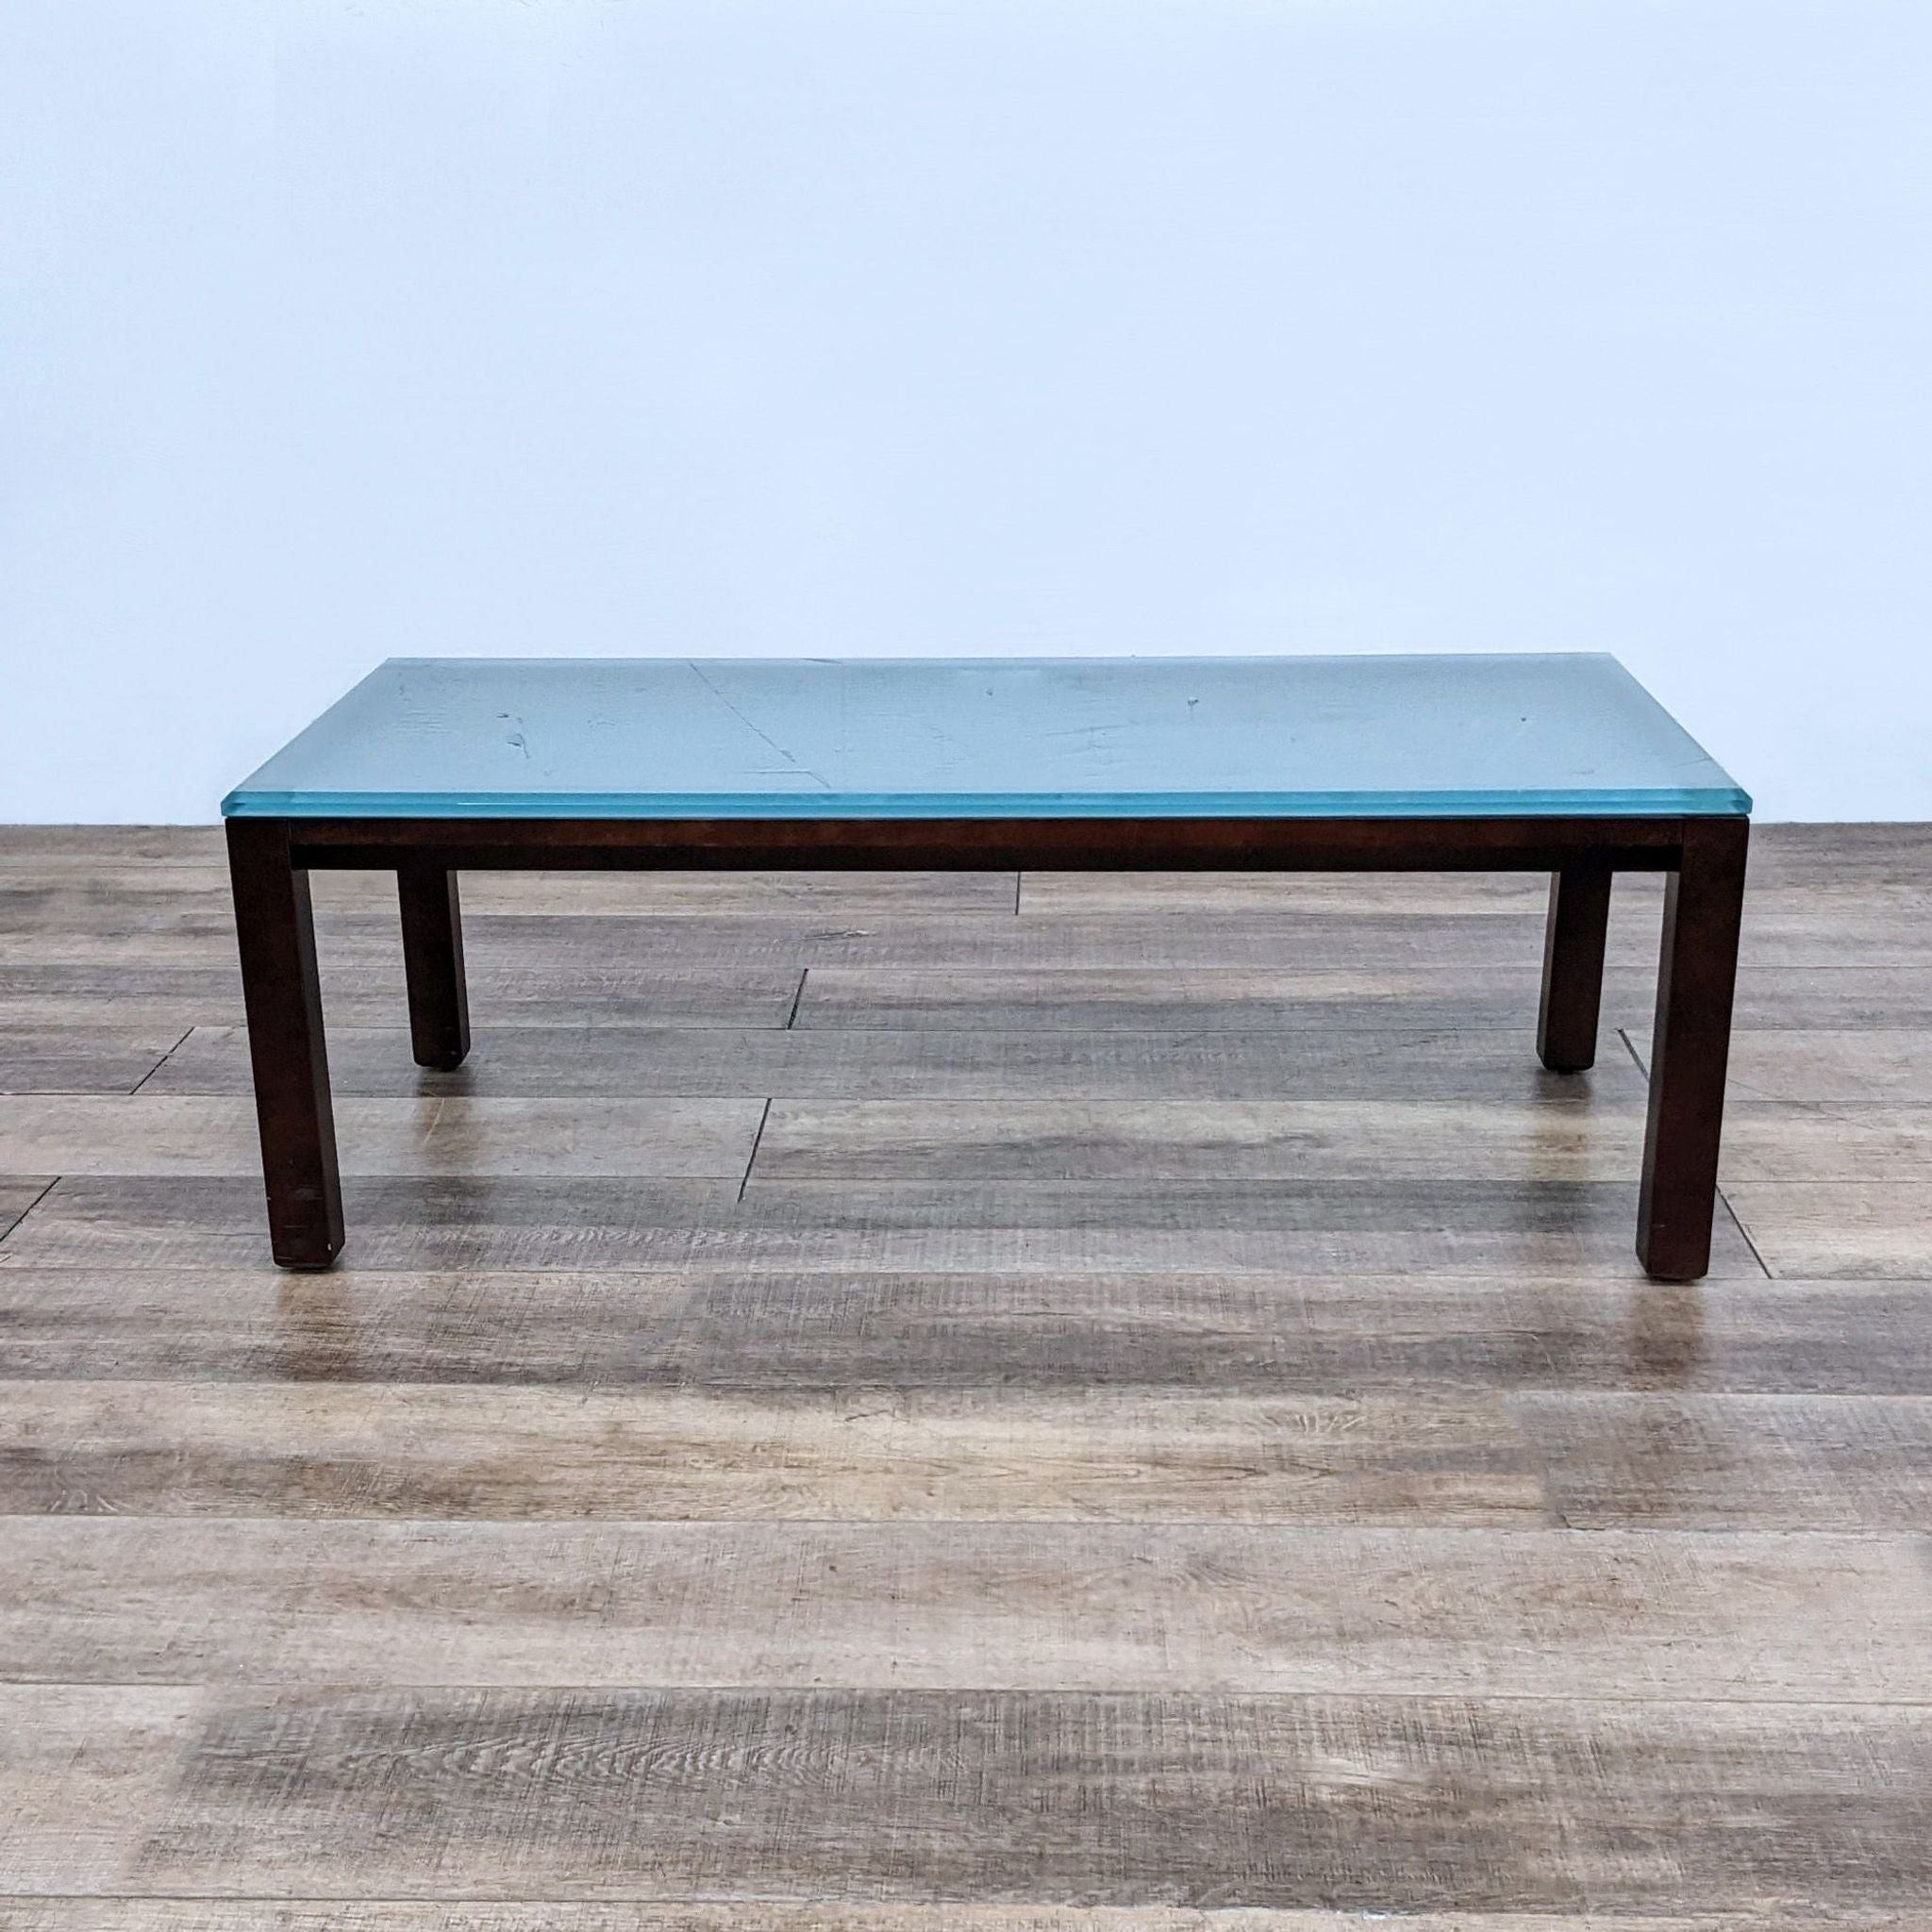 Reperch brand coffee table with a dark wood base and a frosted glass top, viewed from the front.